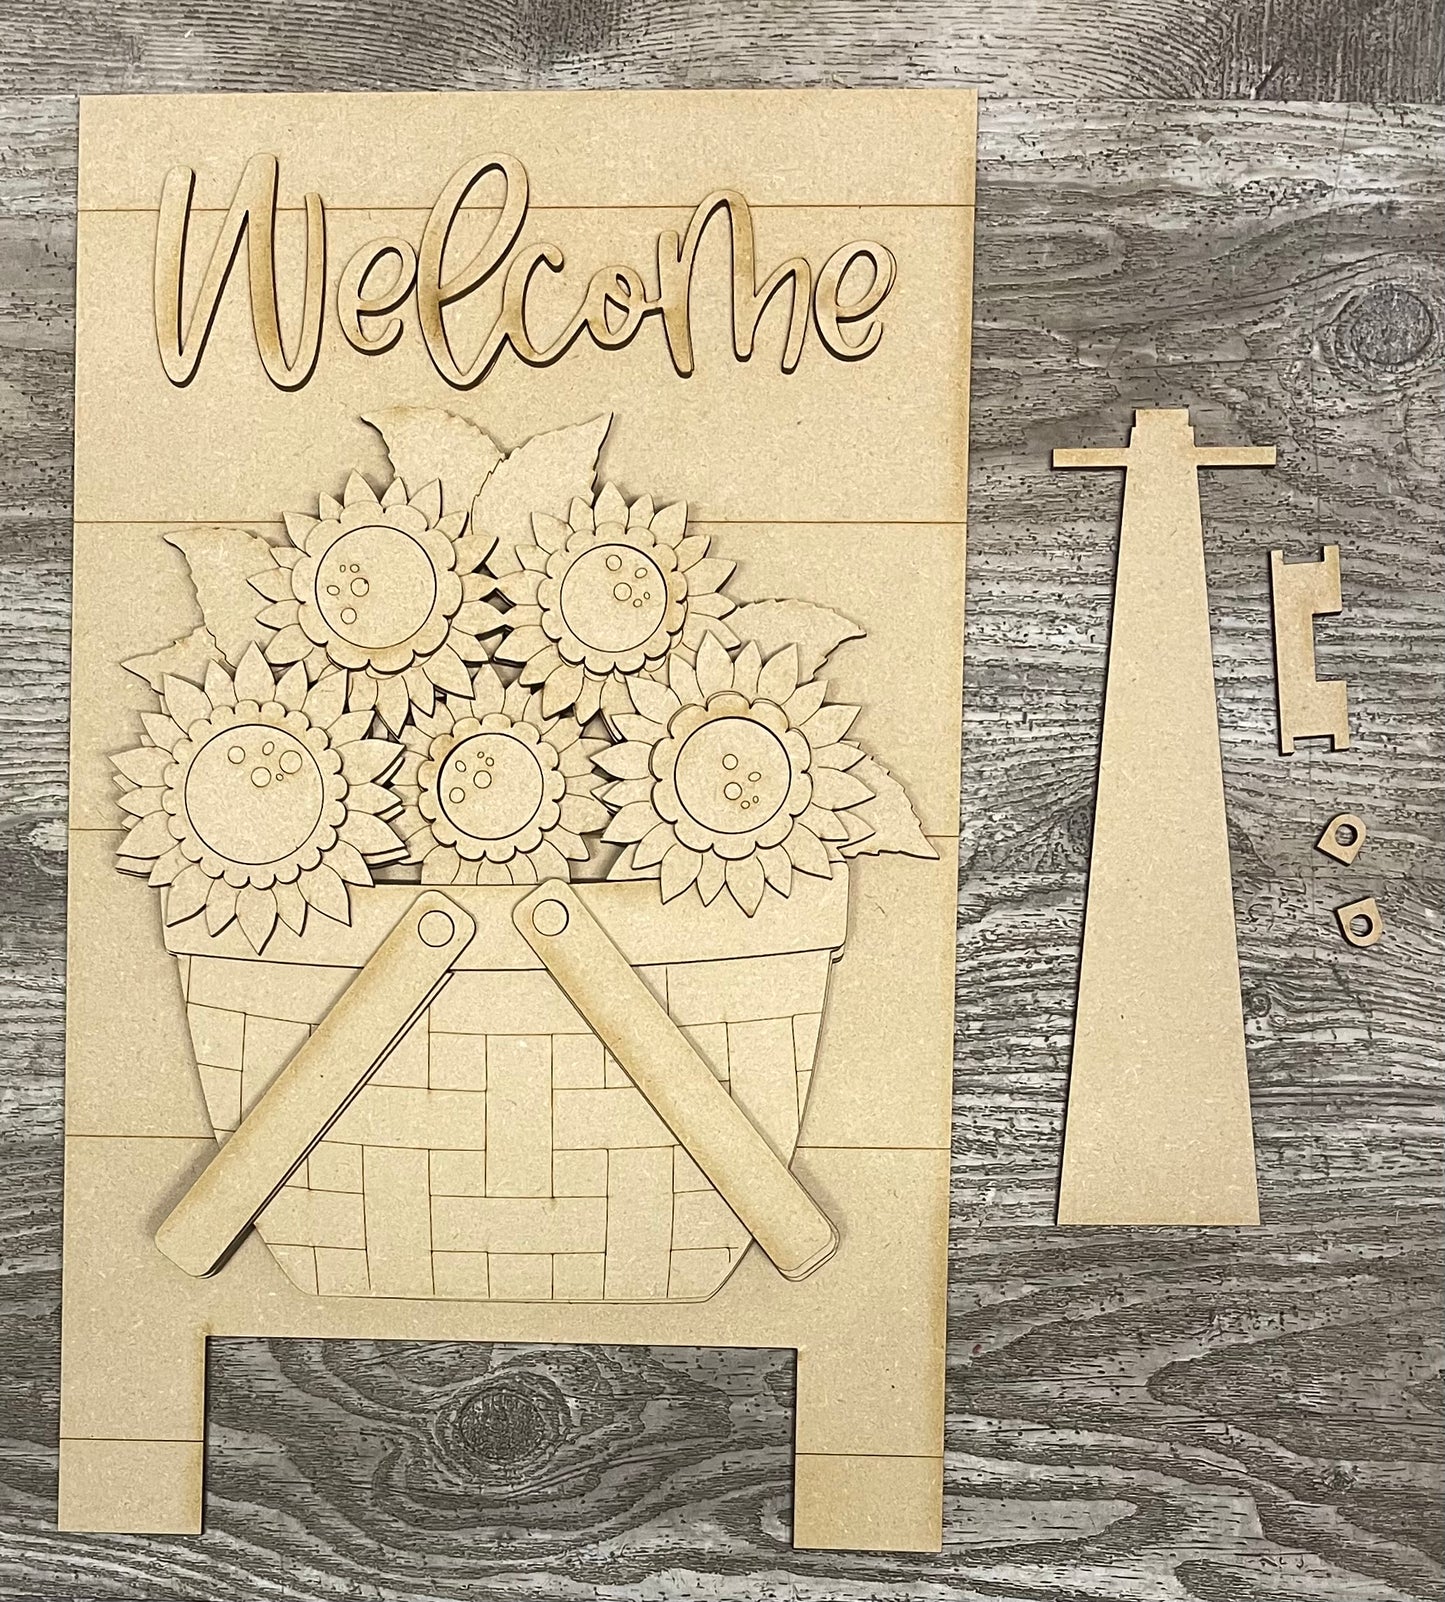 Leaning Welcome sign with basket to be used with the removable pieces unpainted wood cutouts, ready for you to paint